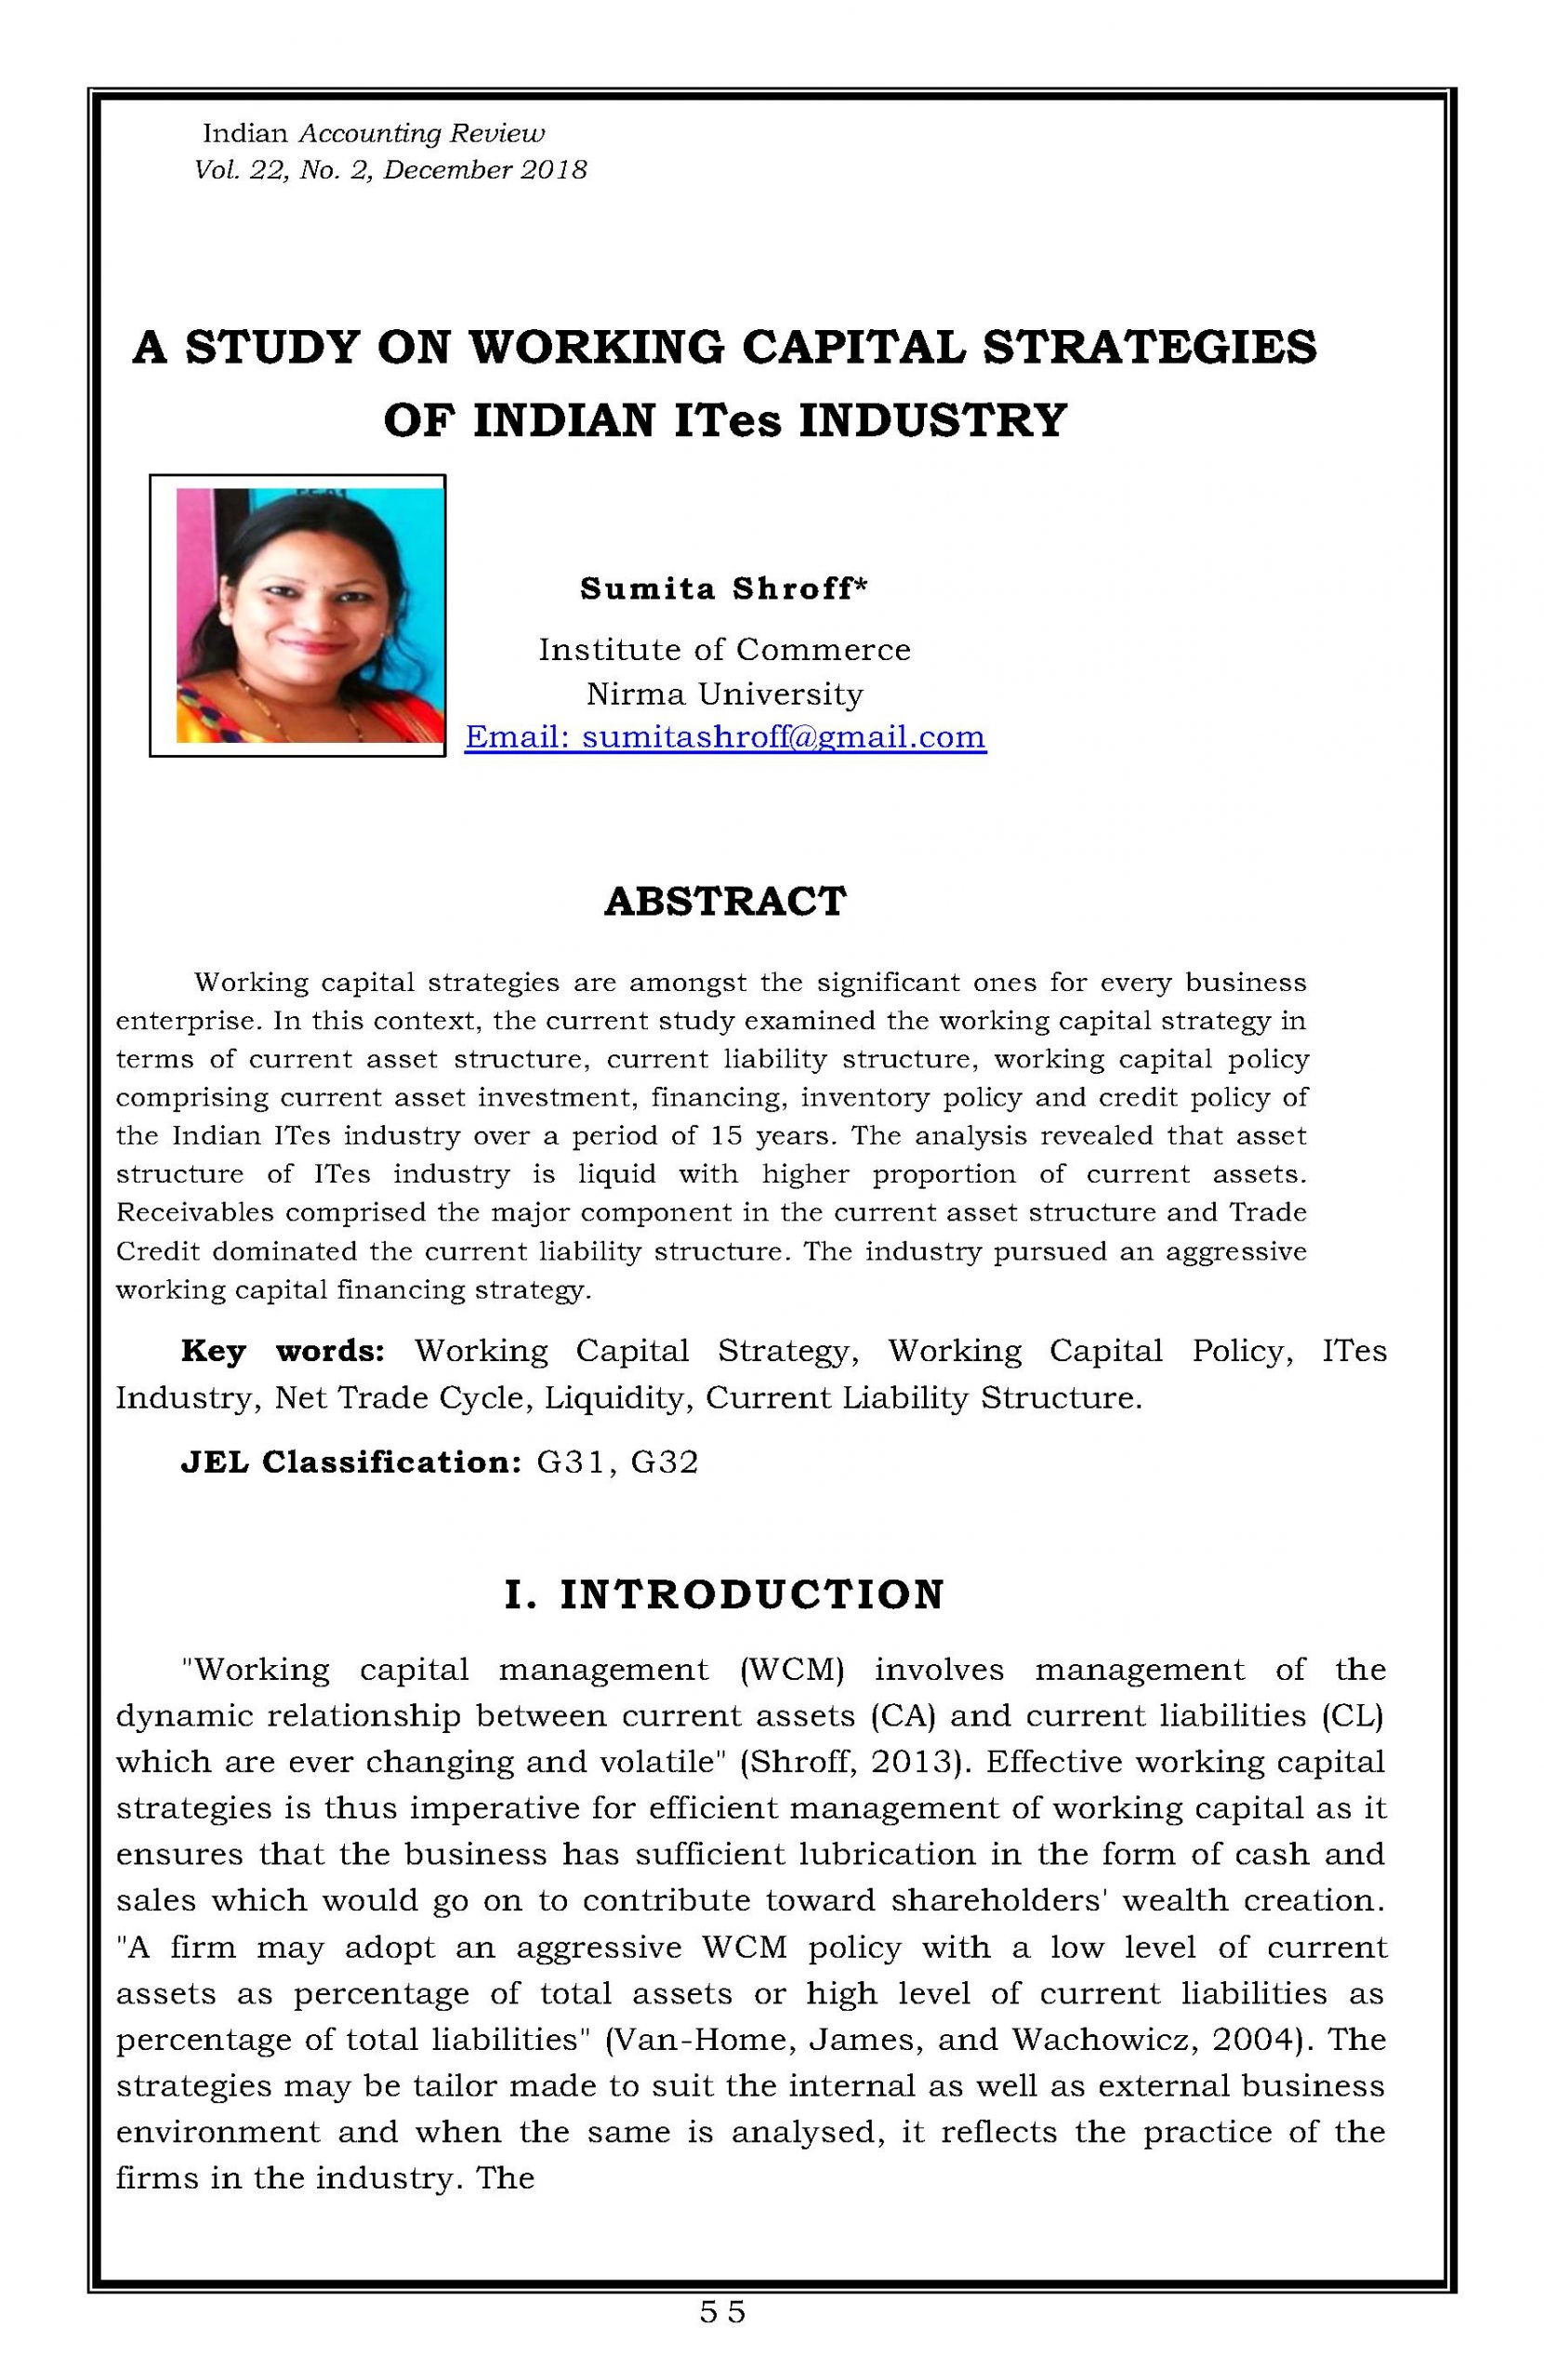 A Study on Working Capital Strategies of Indian ITes Industry